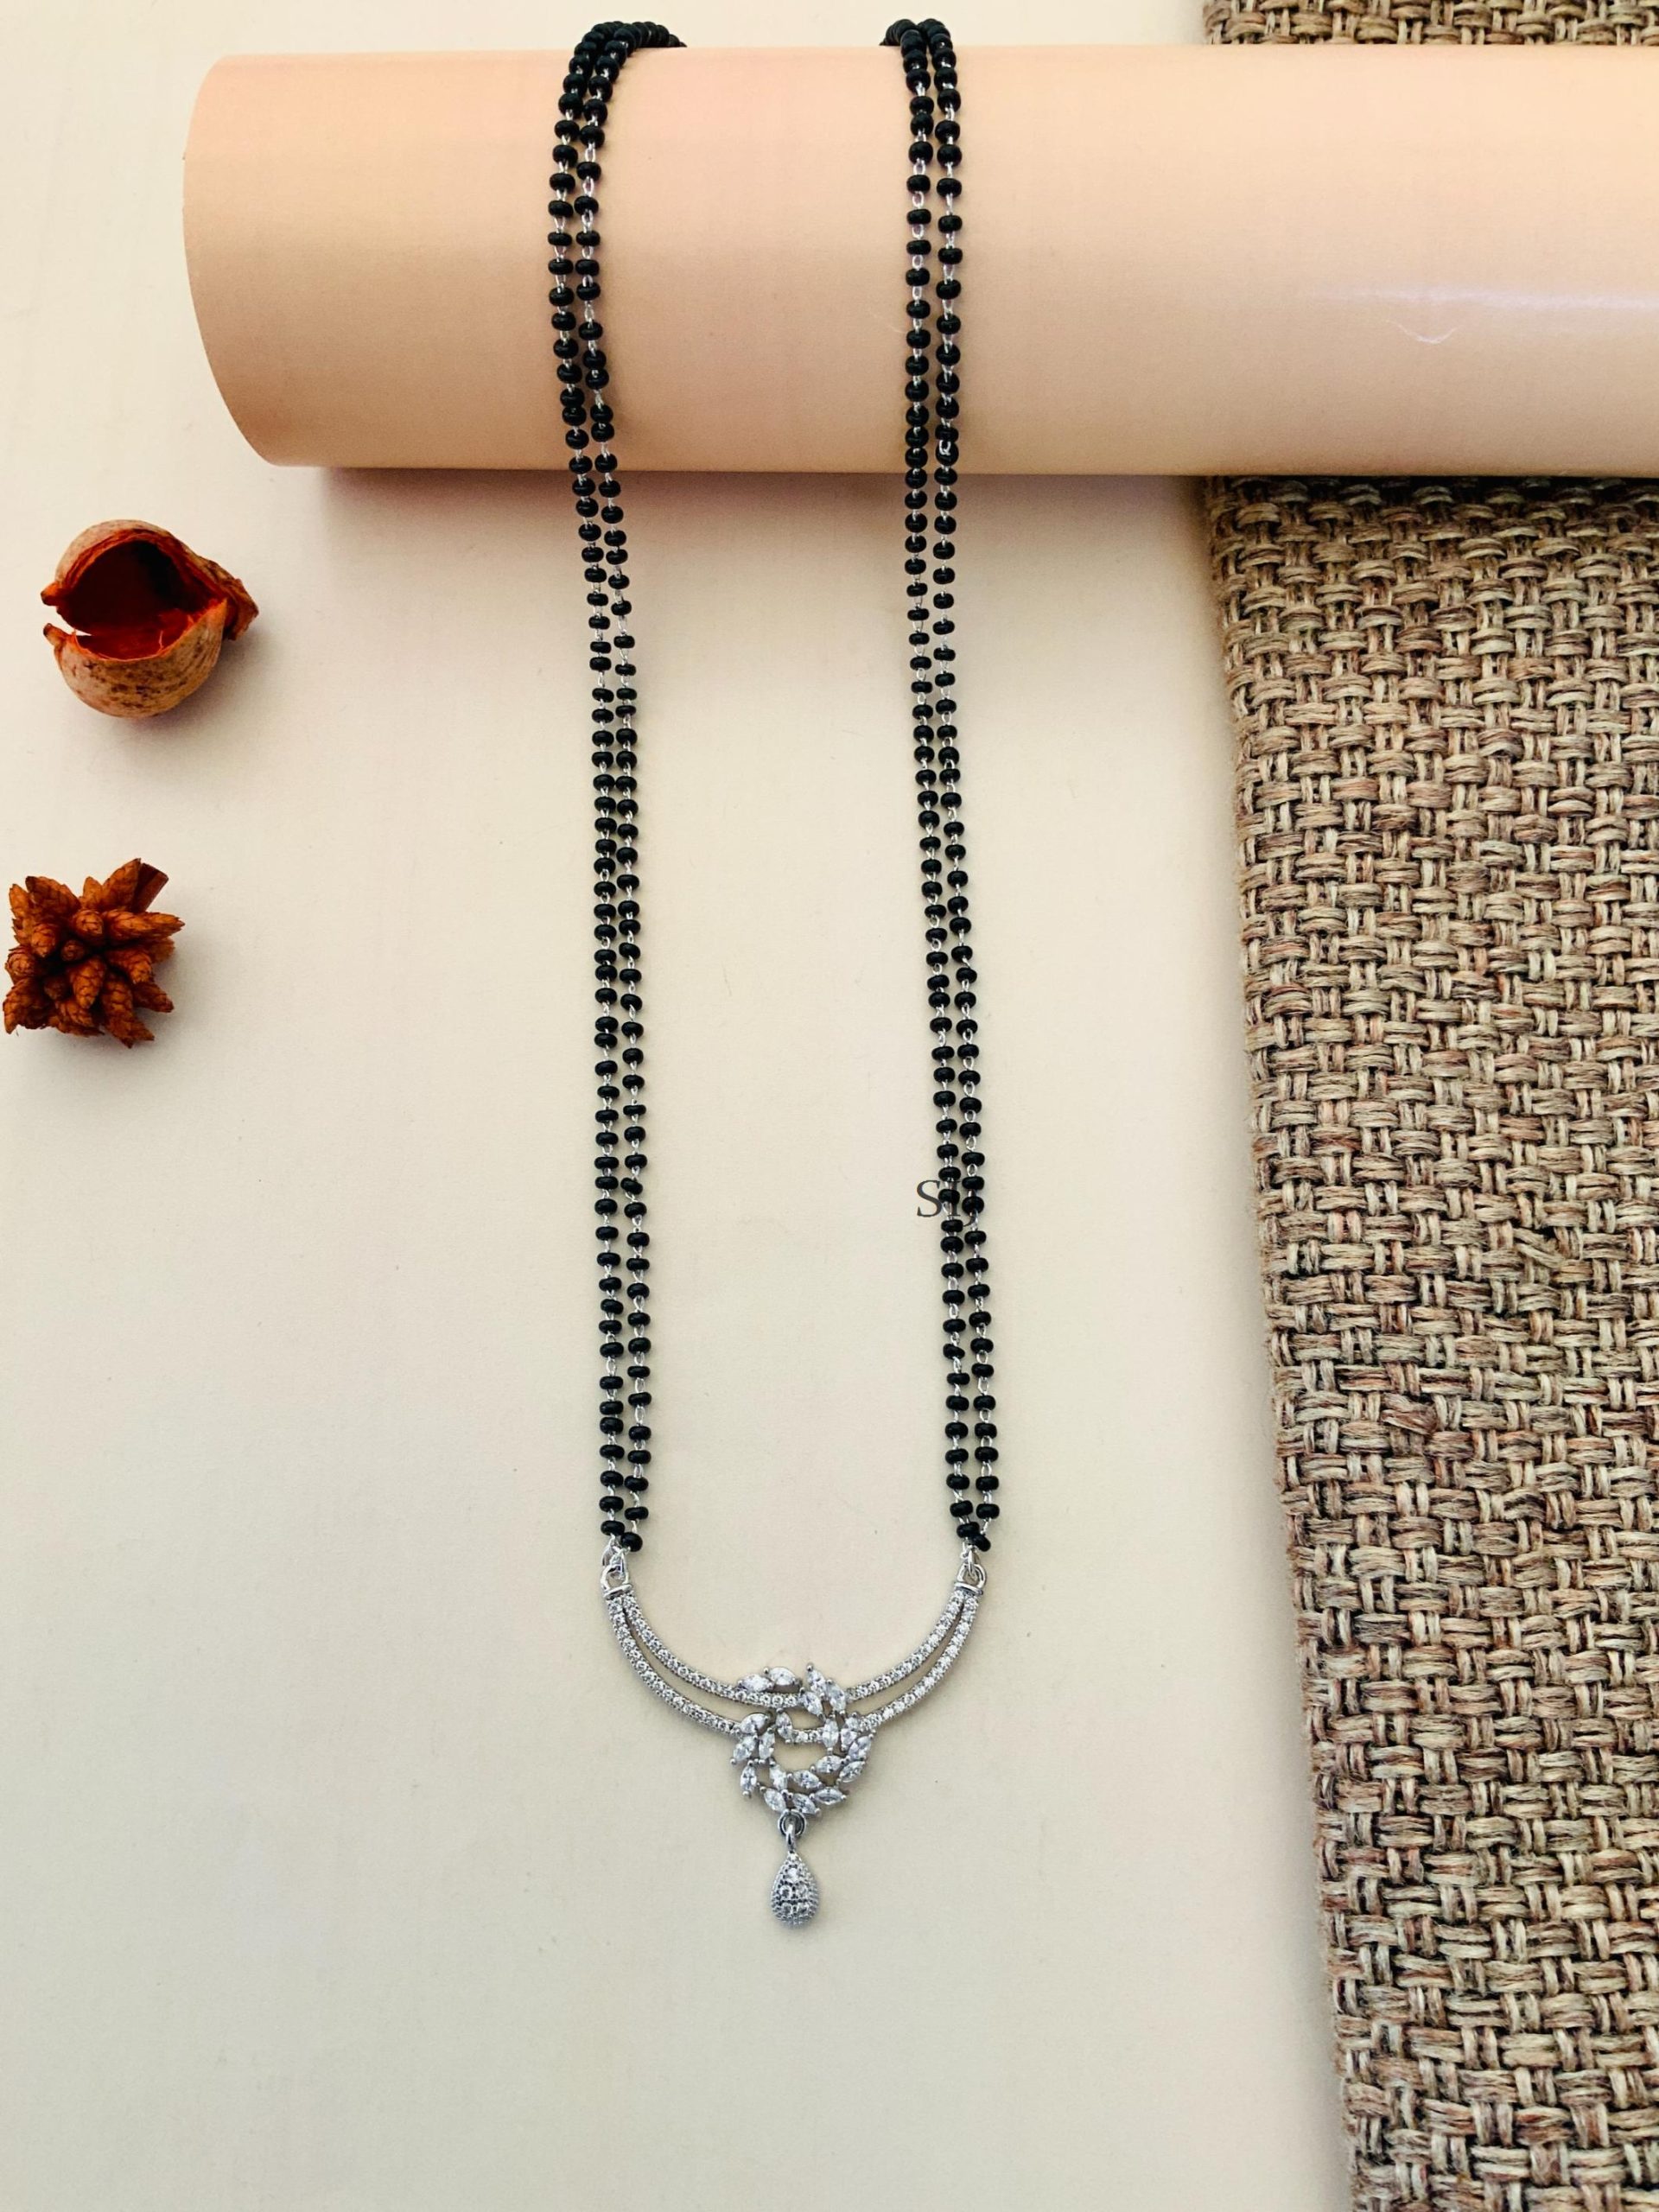 High-Quality Silver Plated Mangalsutra